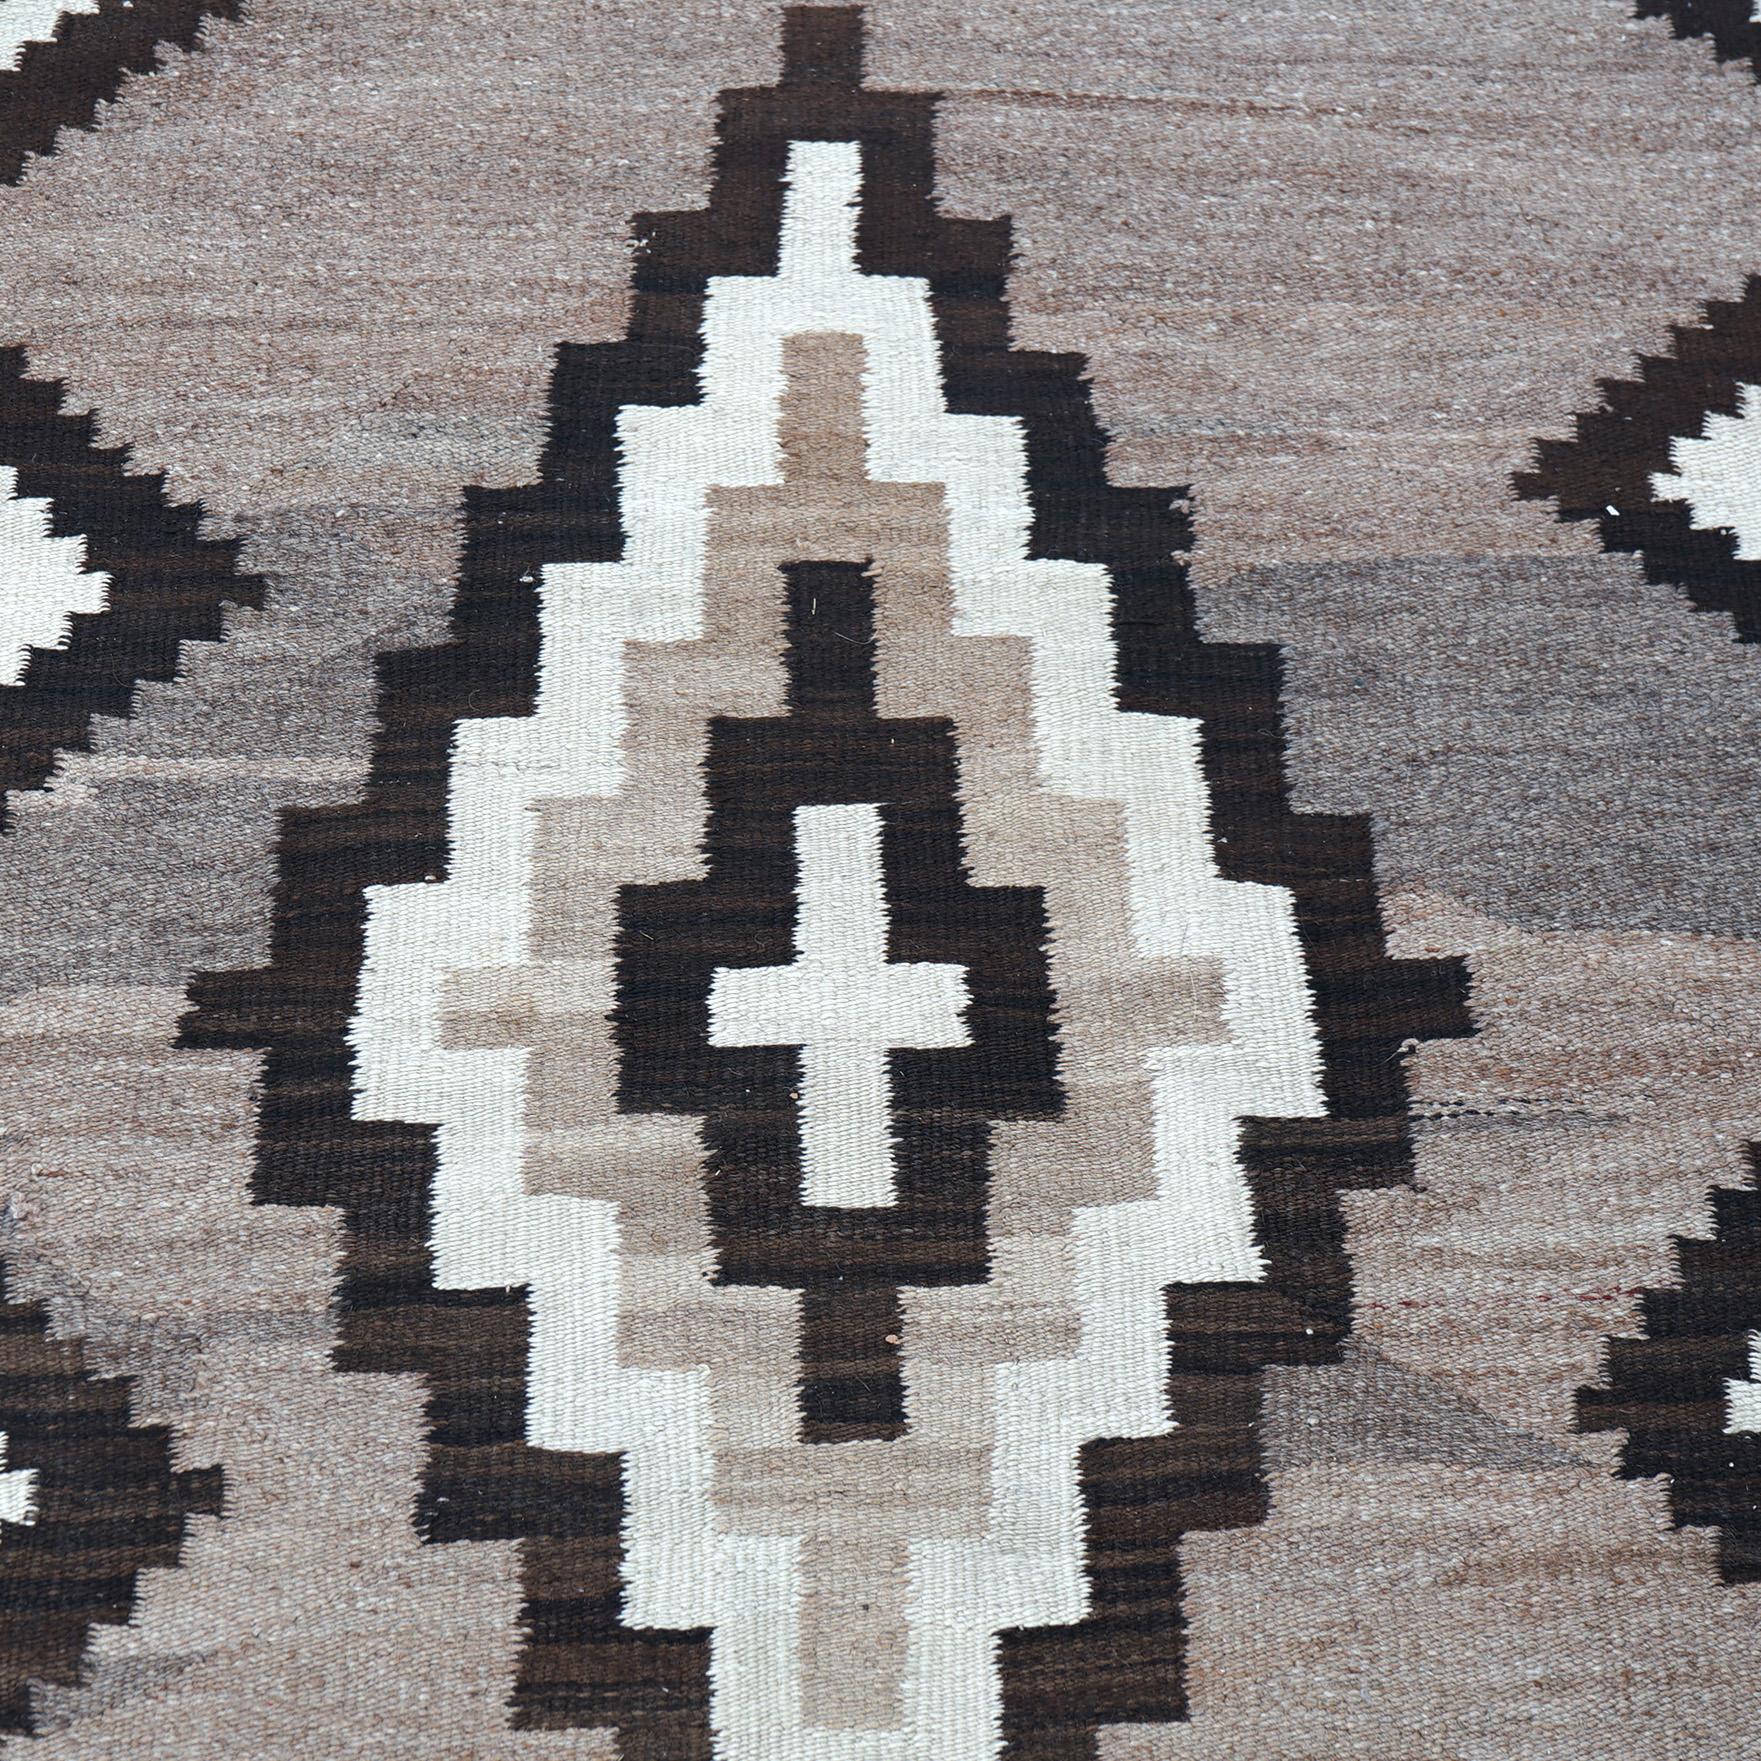 Antique Two Gray Hills Southwest American Indian Navajo Wool Rug Circa 1920 9